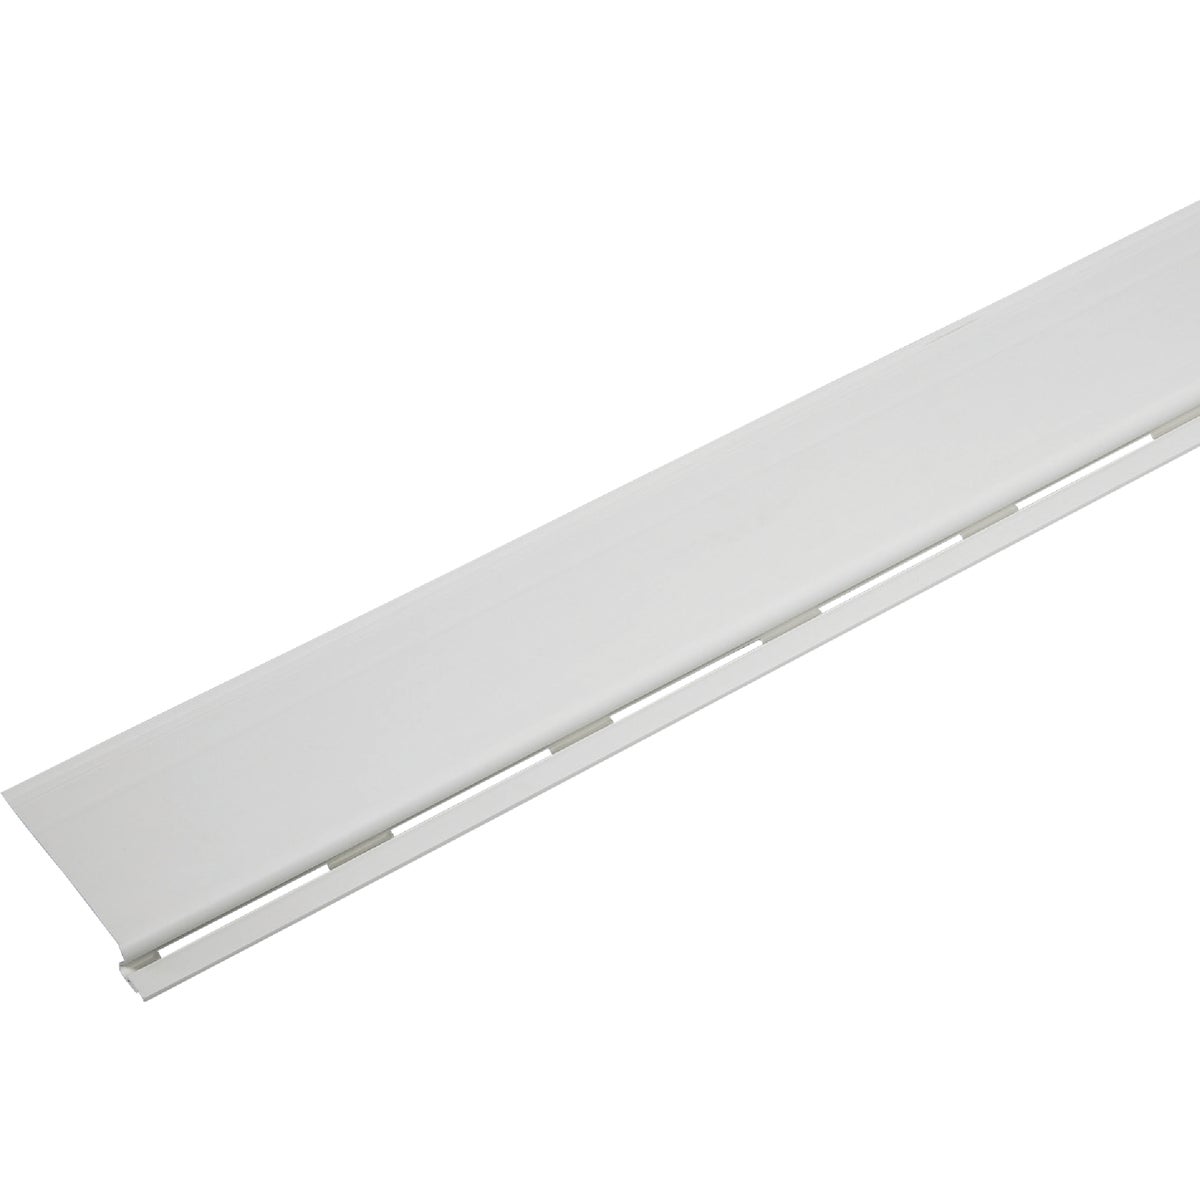 Amerimax 6-1/2 In. x 4 Ft. White PVC Gutter Cover